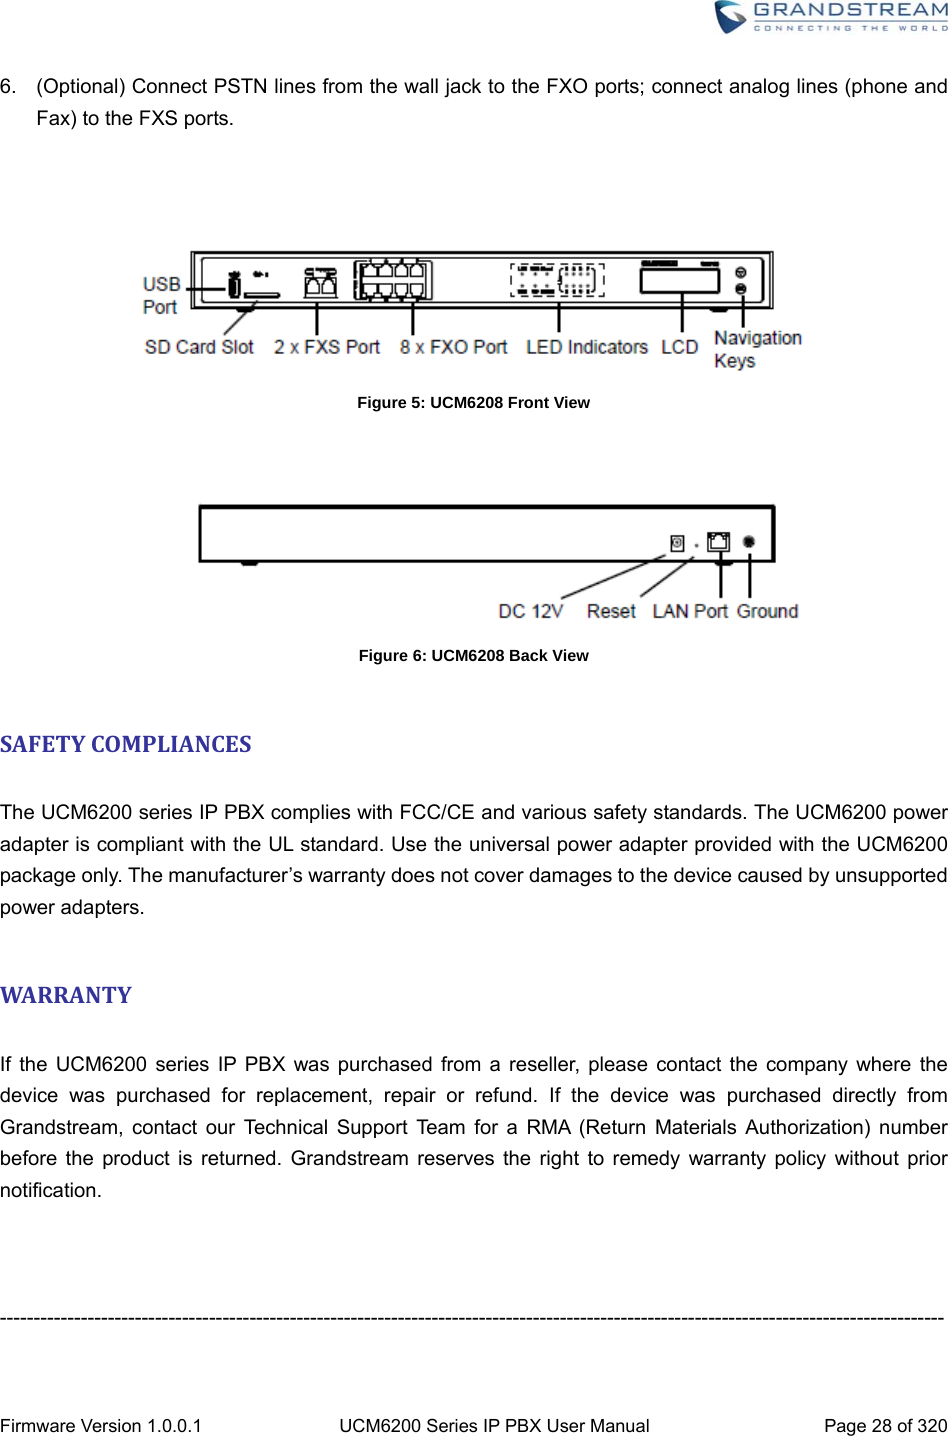  Firmware Version 1.0.0.1  UCM6200 Series IP PBX User Manual  Page 28 of 320 6.  (Optional) Connect PSTN lines from the wall jack to the FXO ports; connect analog lines (phone and Fax) to the FXS ports.     Figure 5: UCM6208 Front View     Figure 6: UCM6208 Back View  SAFETYCOMPLIANCES The UCM6200 series IP PBX complies with FCC/CE and various safety standards. The UCM6200 power adapter is compliant with the UL standard. Use the universal power adapter provided with the UCM6200 package only. The manufacturer’s warranty does not cover damages to the device caused by unsupported power adapters.  WARRANTY If the UCM6200 series IP PBX was purchased from a reseller, please contact the company where the device was purchased for replacement, repair or refund. If the device was purchased directly from Grandstream, contact our Technical Support Team for a RMA (Return Materials Authorization) number before the product is returned. Grandstream reserves the right to remedy warranty policy without prior notification.    -------------------------------------------------------------------------------------------------------------------------------------------- 